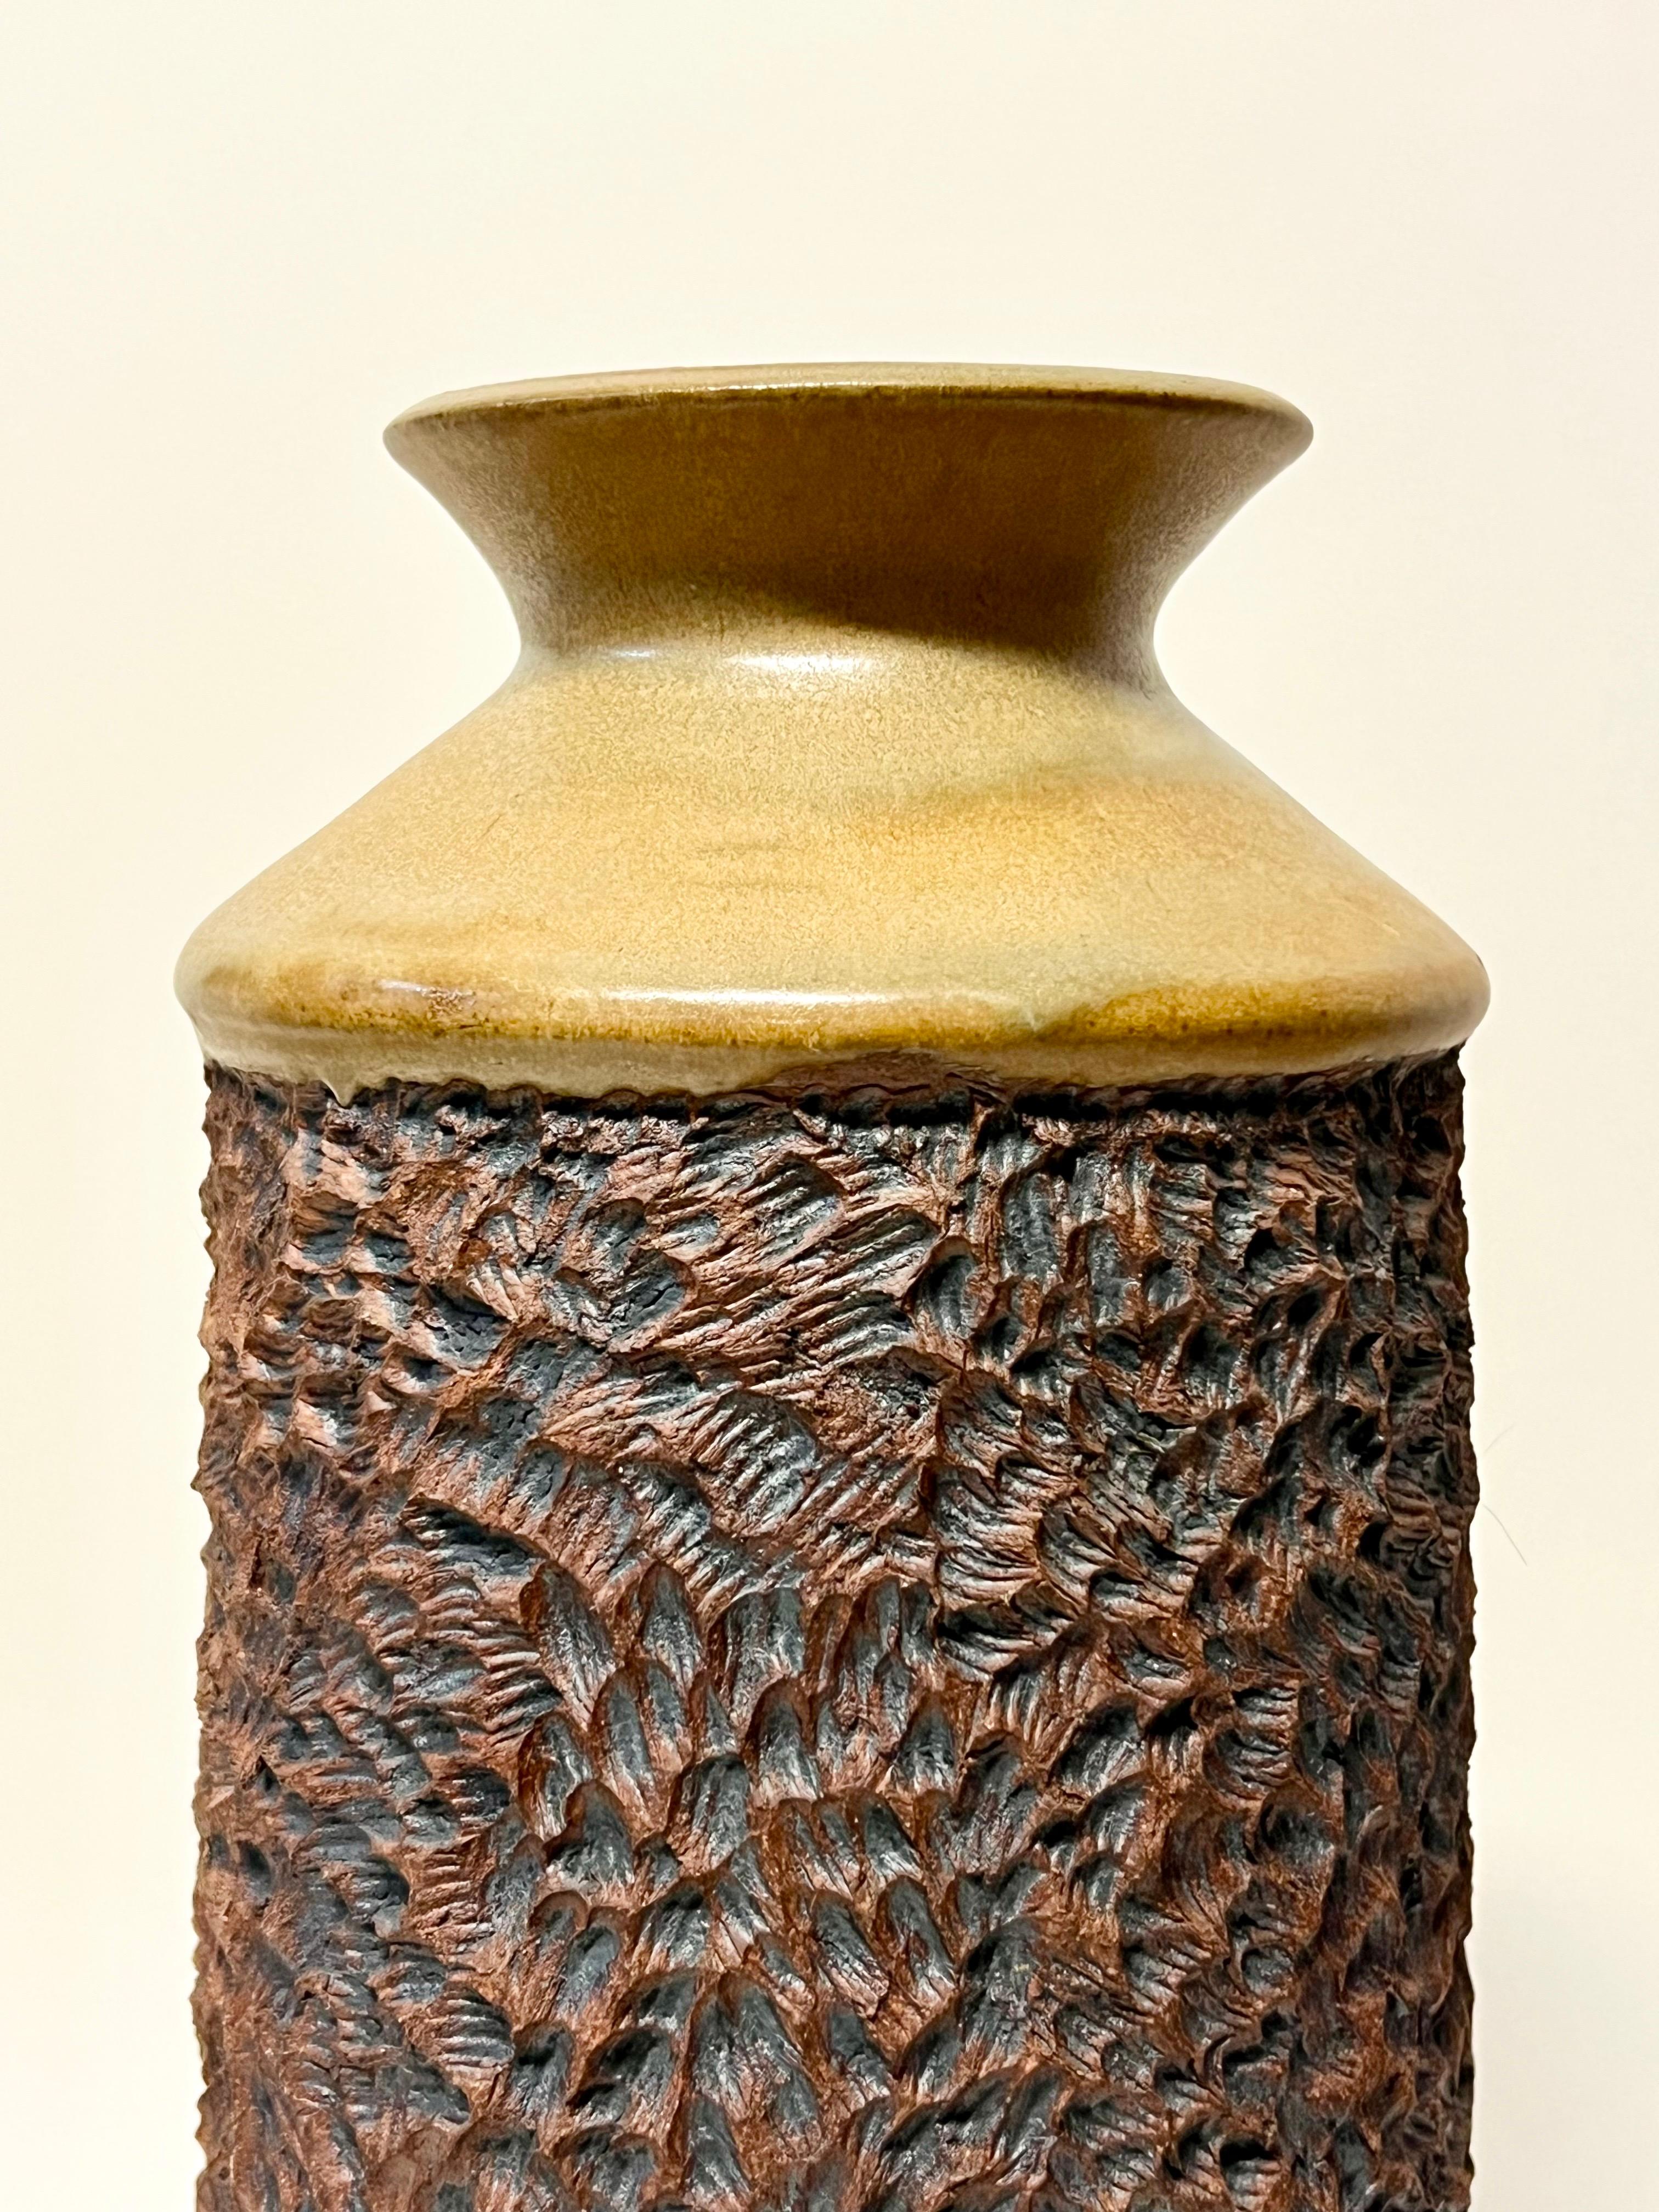 Stunning early vase by noted ceramicist, Anne Goldman c1970s, California. Goldman's work is wheel-thrown stoneware with carved, sculpted, and pierced surfaces enhanced with porcelain and iron slips. Her work is represented extensively in galleries,